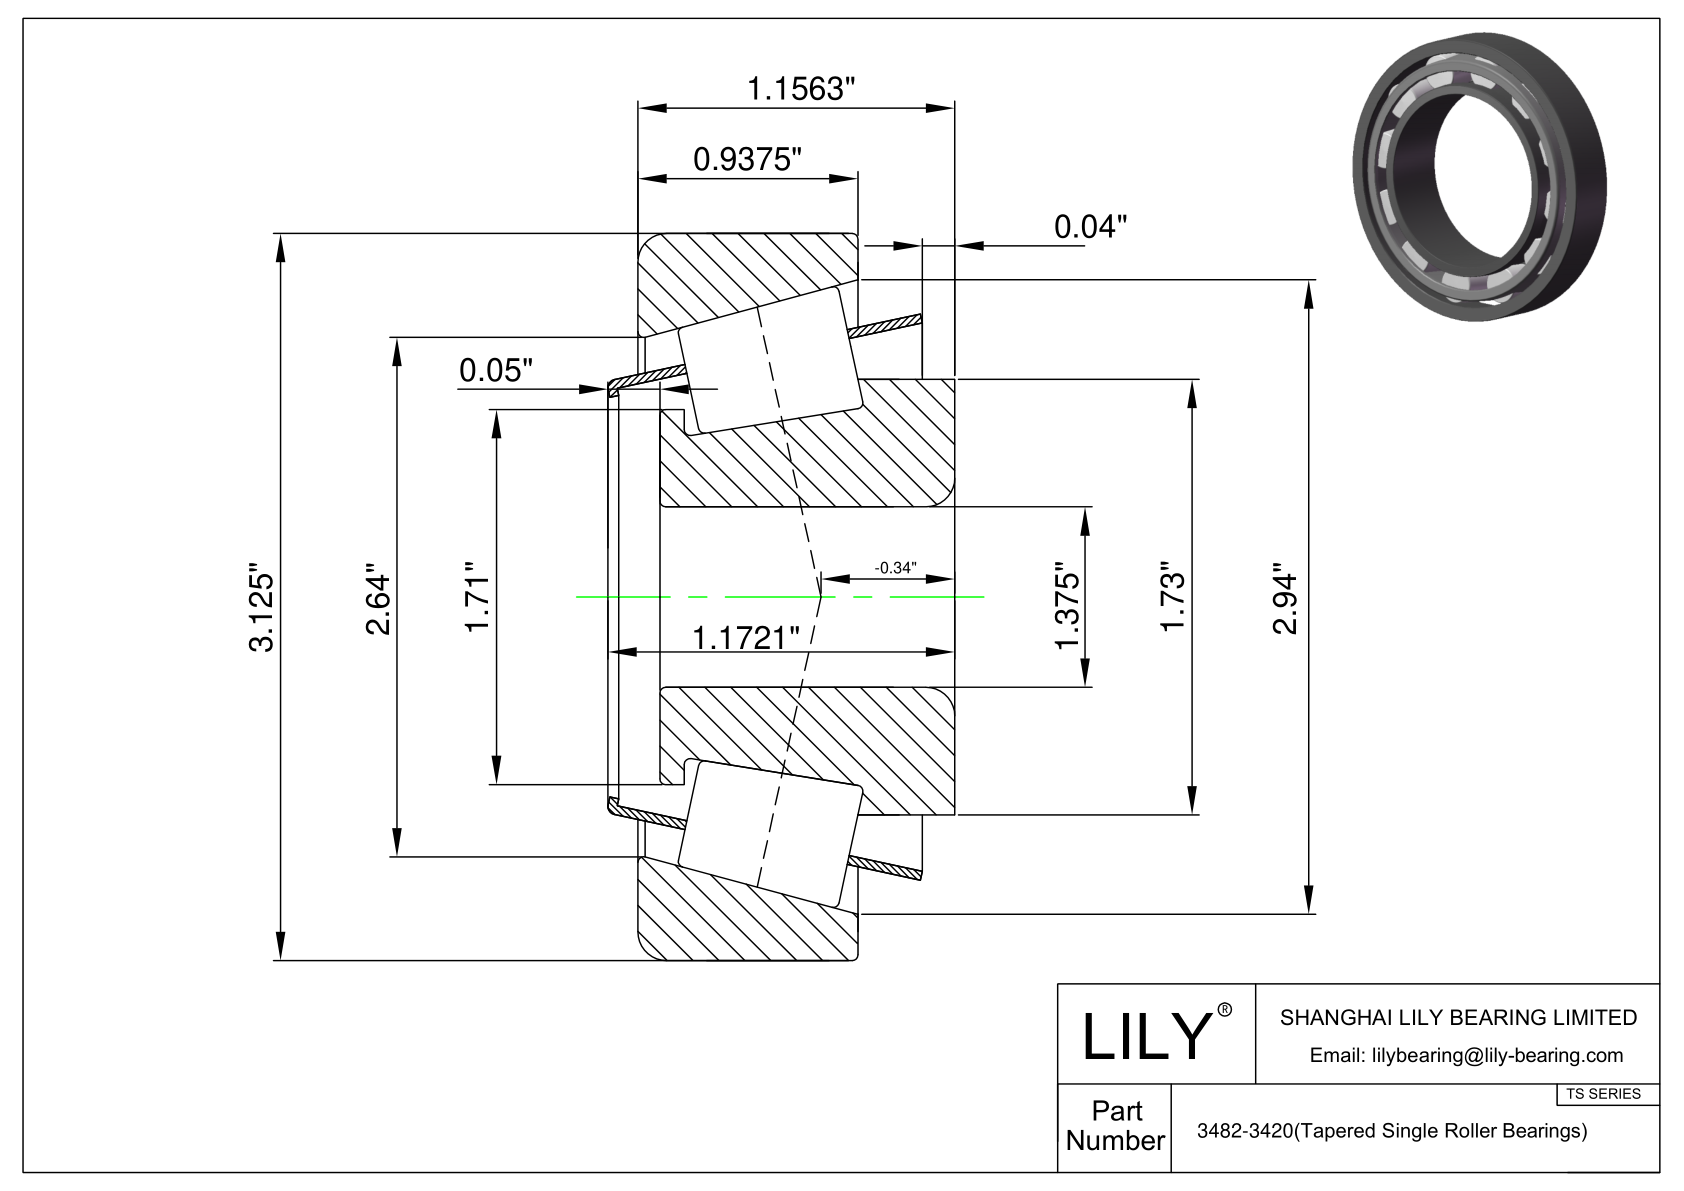 3482-3420 TS (Tapered Single Roller Bearings) (Imperial) cad drawing